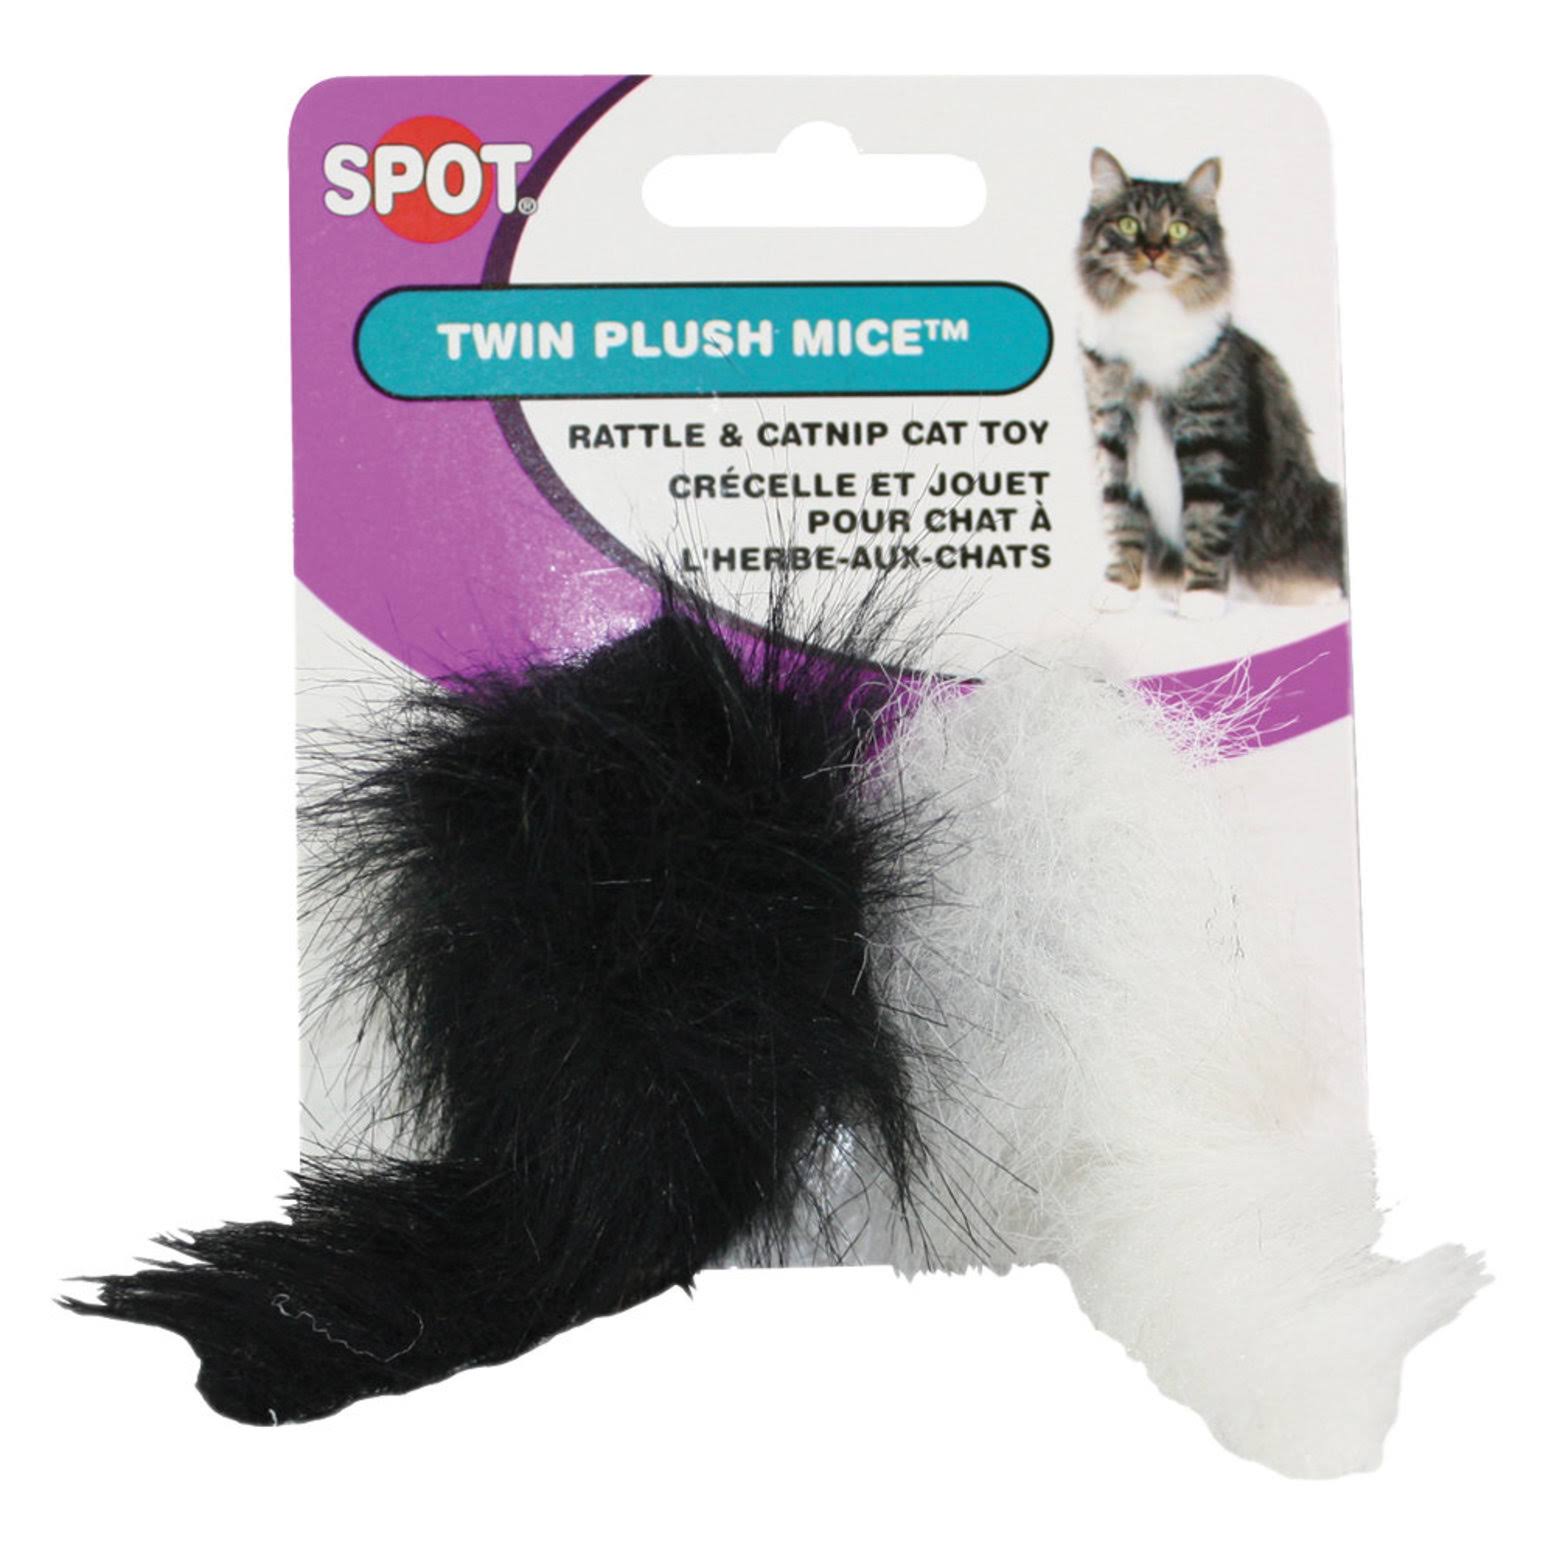 Ethical Products Spot Twin Plush Mice Cat Toy - Rattle and Catnip